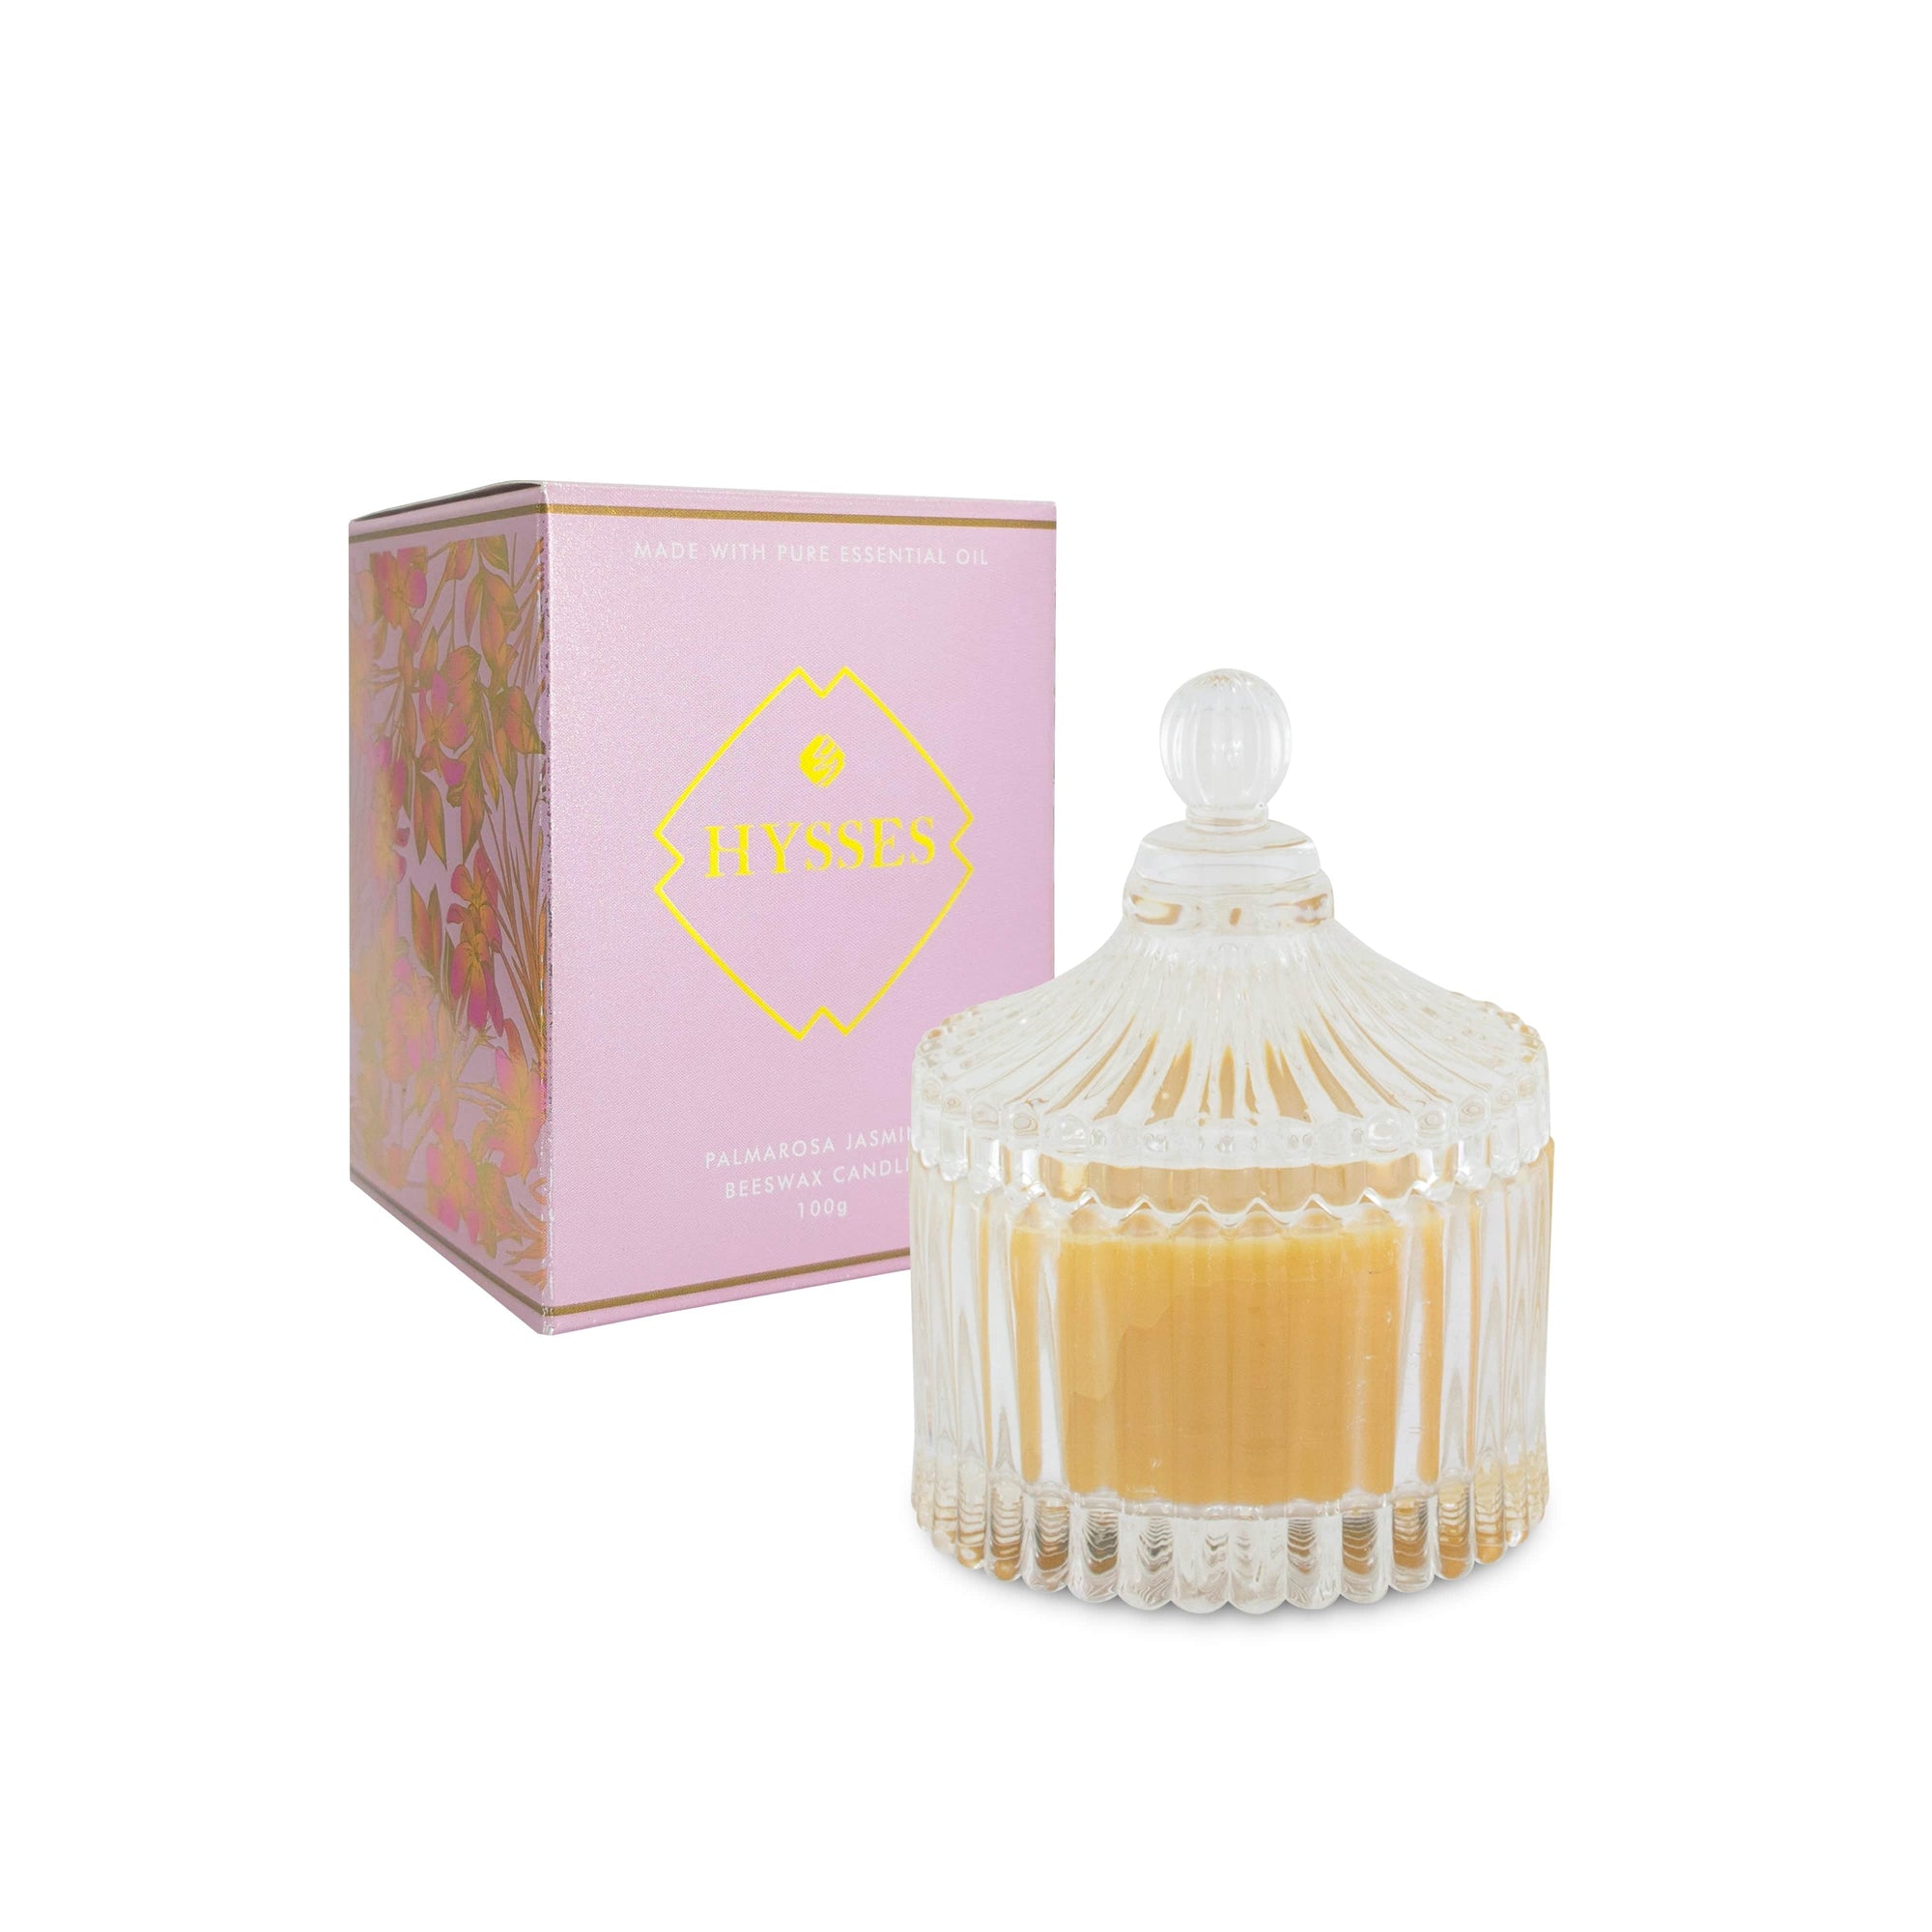 Hysses Home Scents 200g Beeswax Candle Palmarosa Jasmine 200g